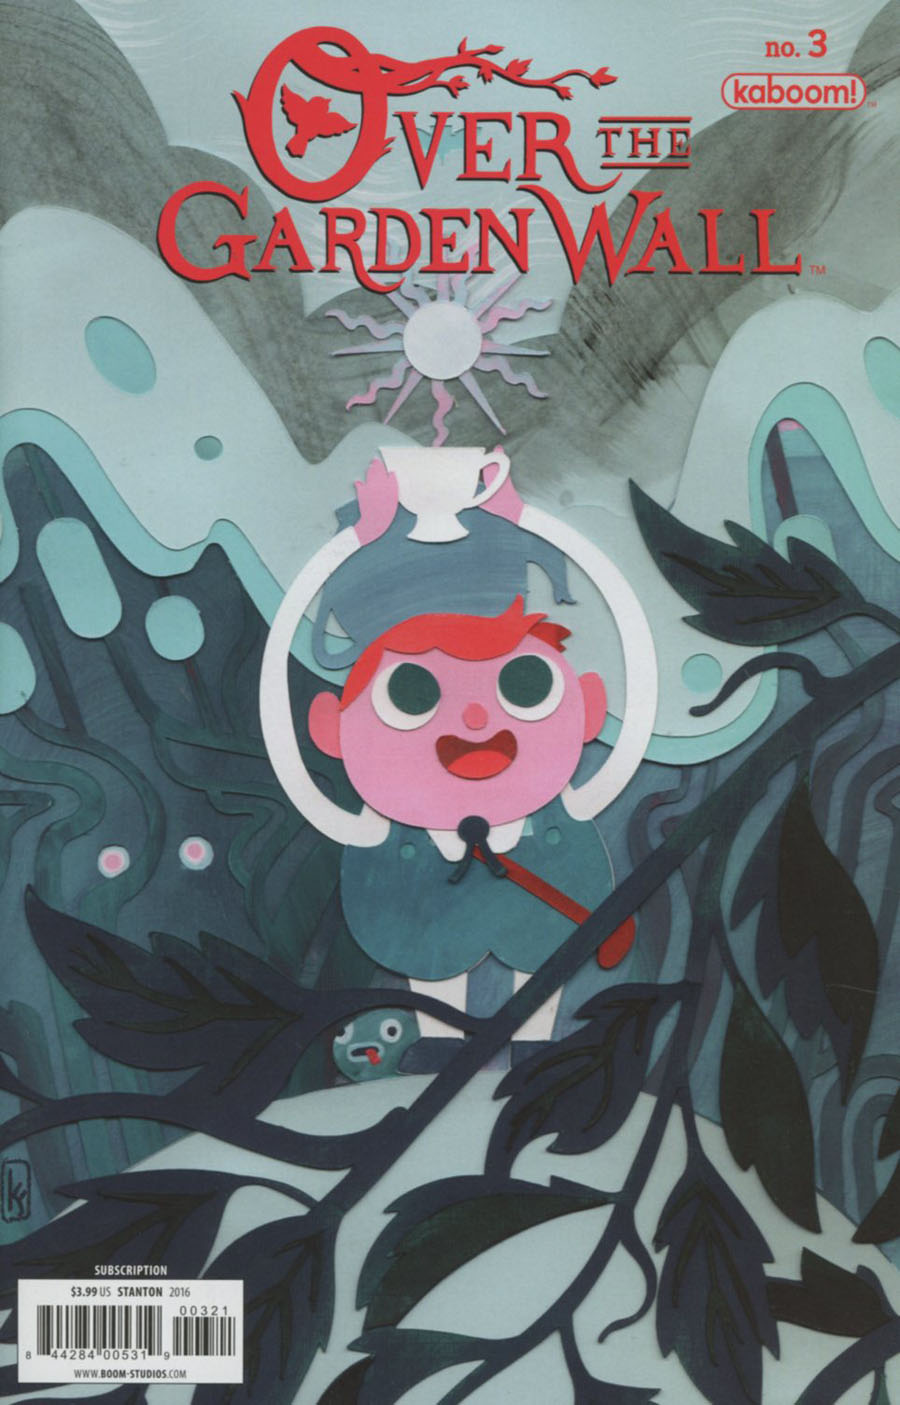 Over The Garden Wall Vol 2 #3 Cover B Variant Kevin Jay Stanton Subscription Cover